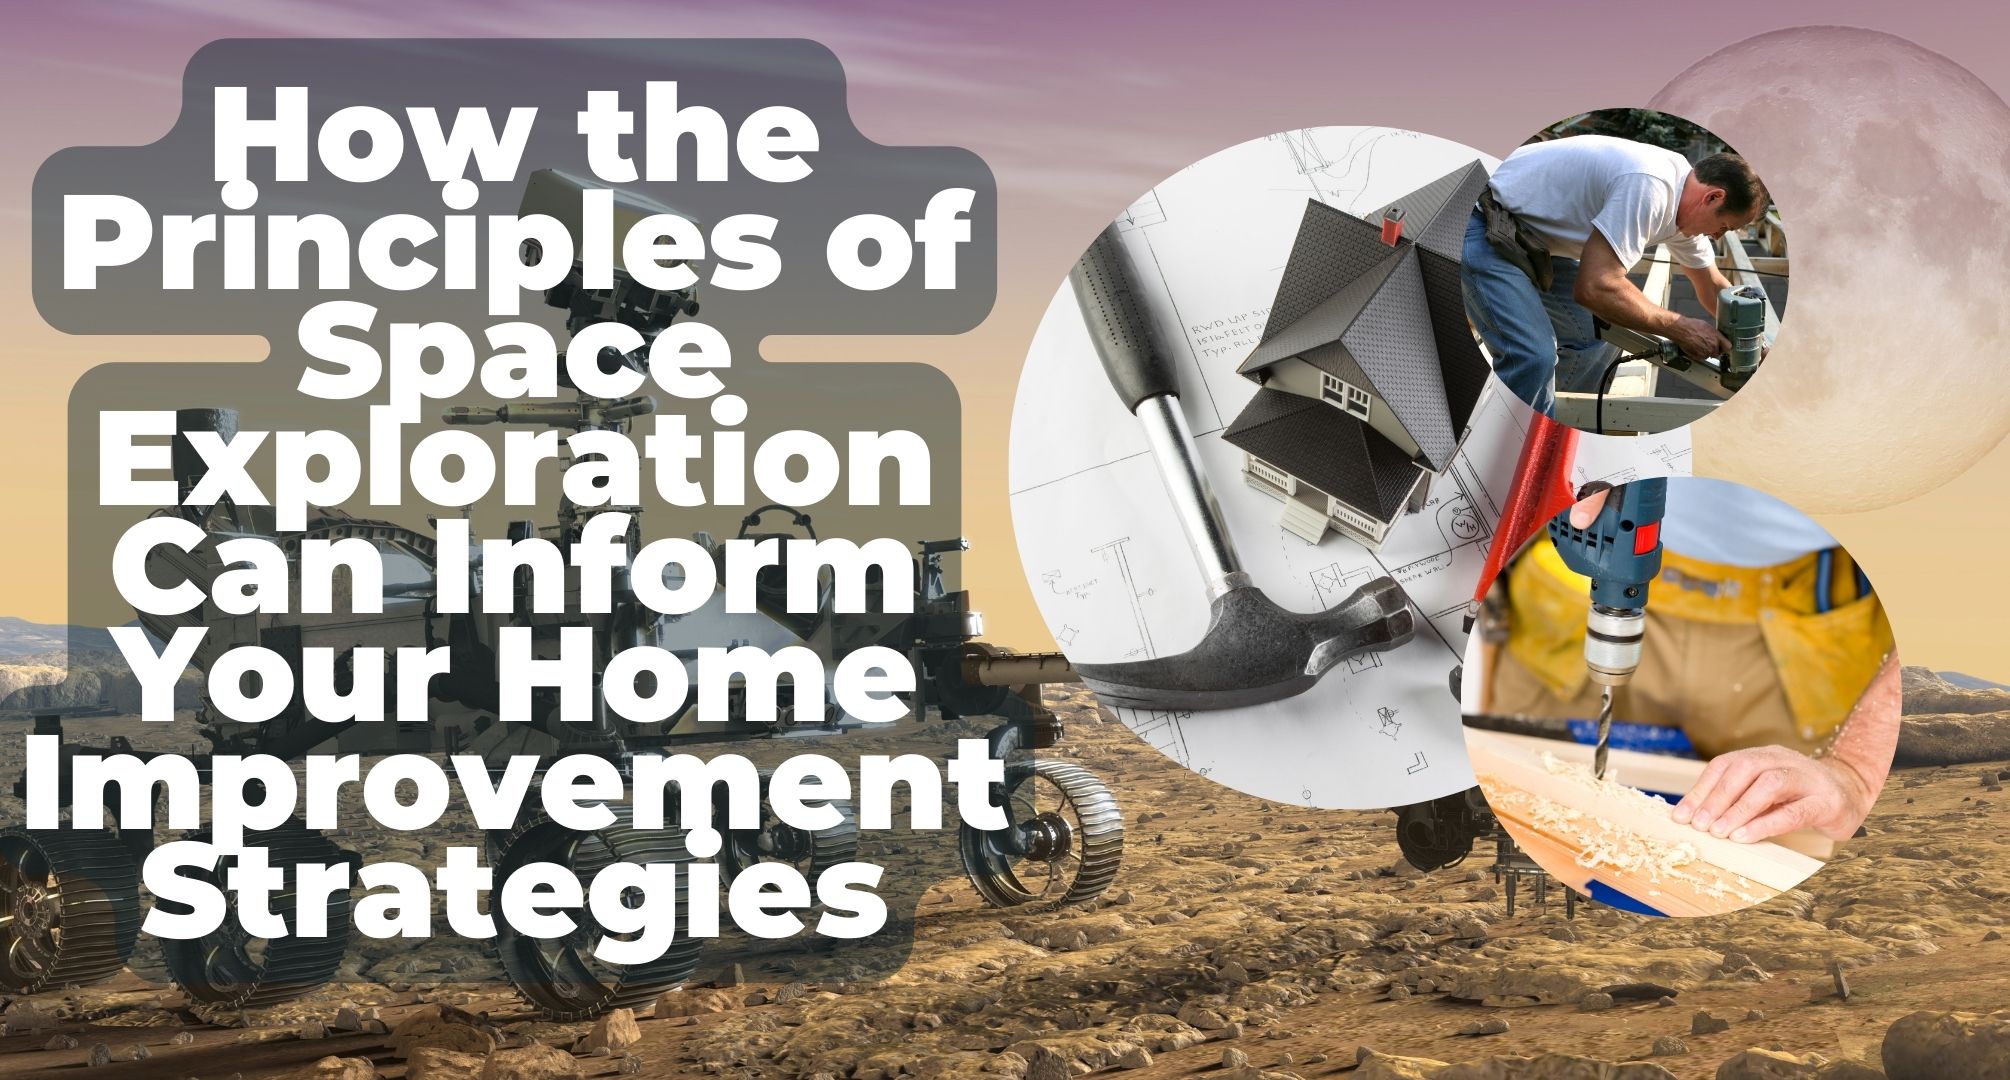 How the Principles of Space Exploration Can Inform Your Home Improvement Strategies